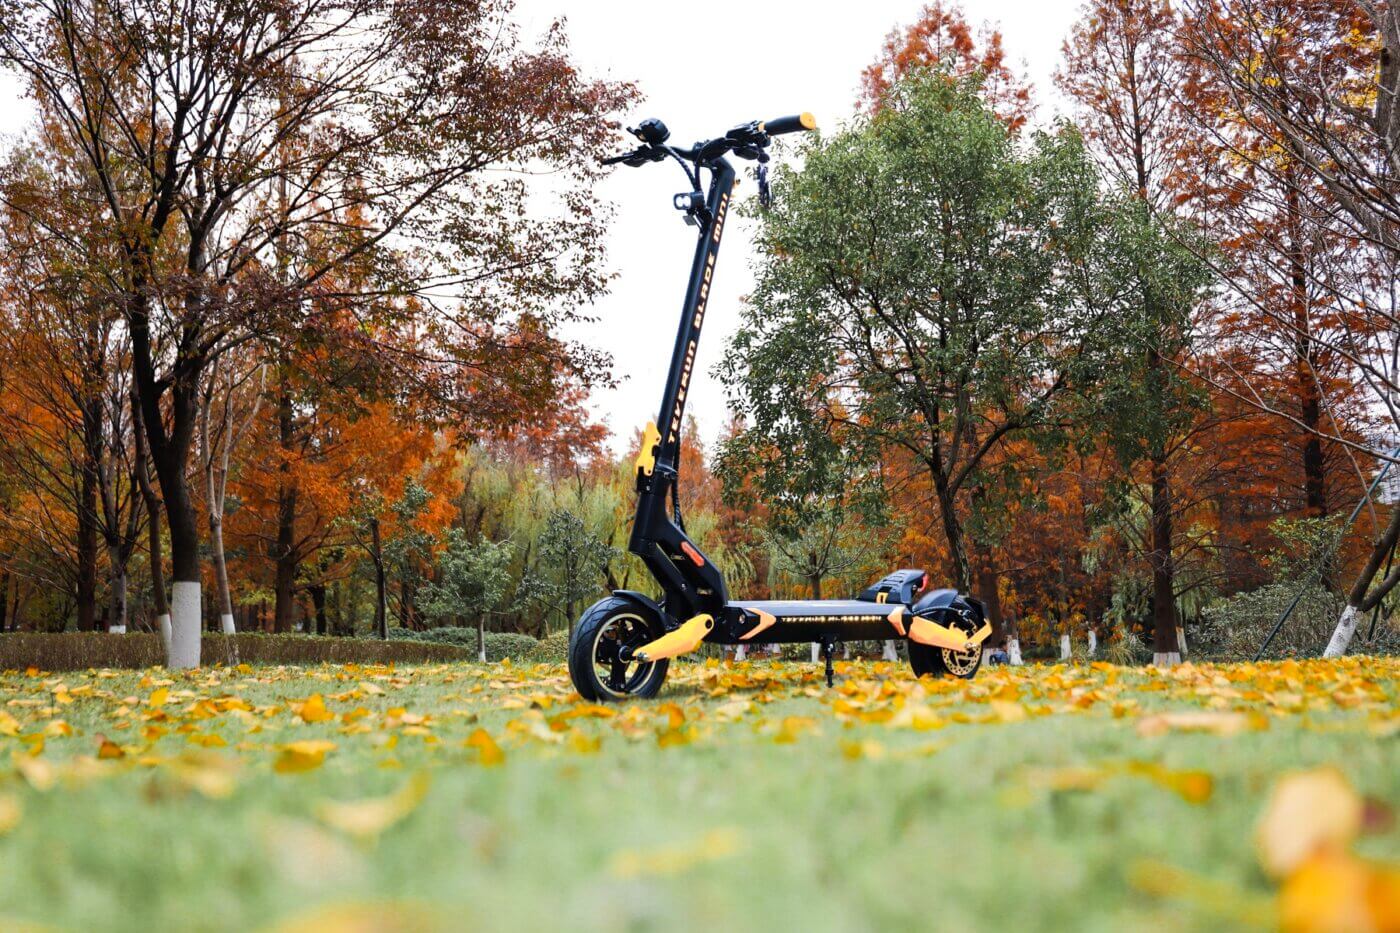 A Blade Mini Pro electric scooter parked in a grassy field.